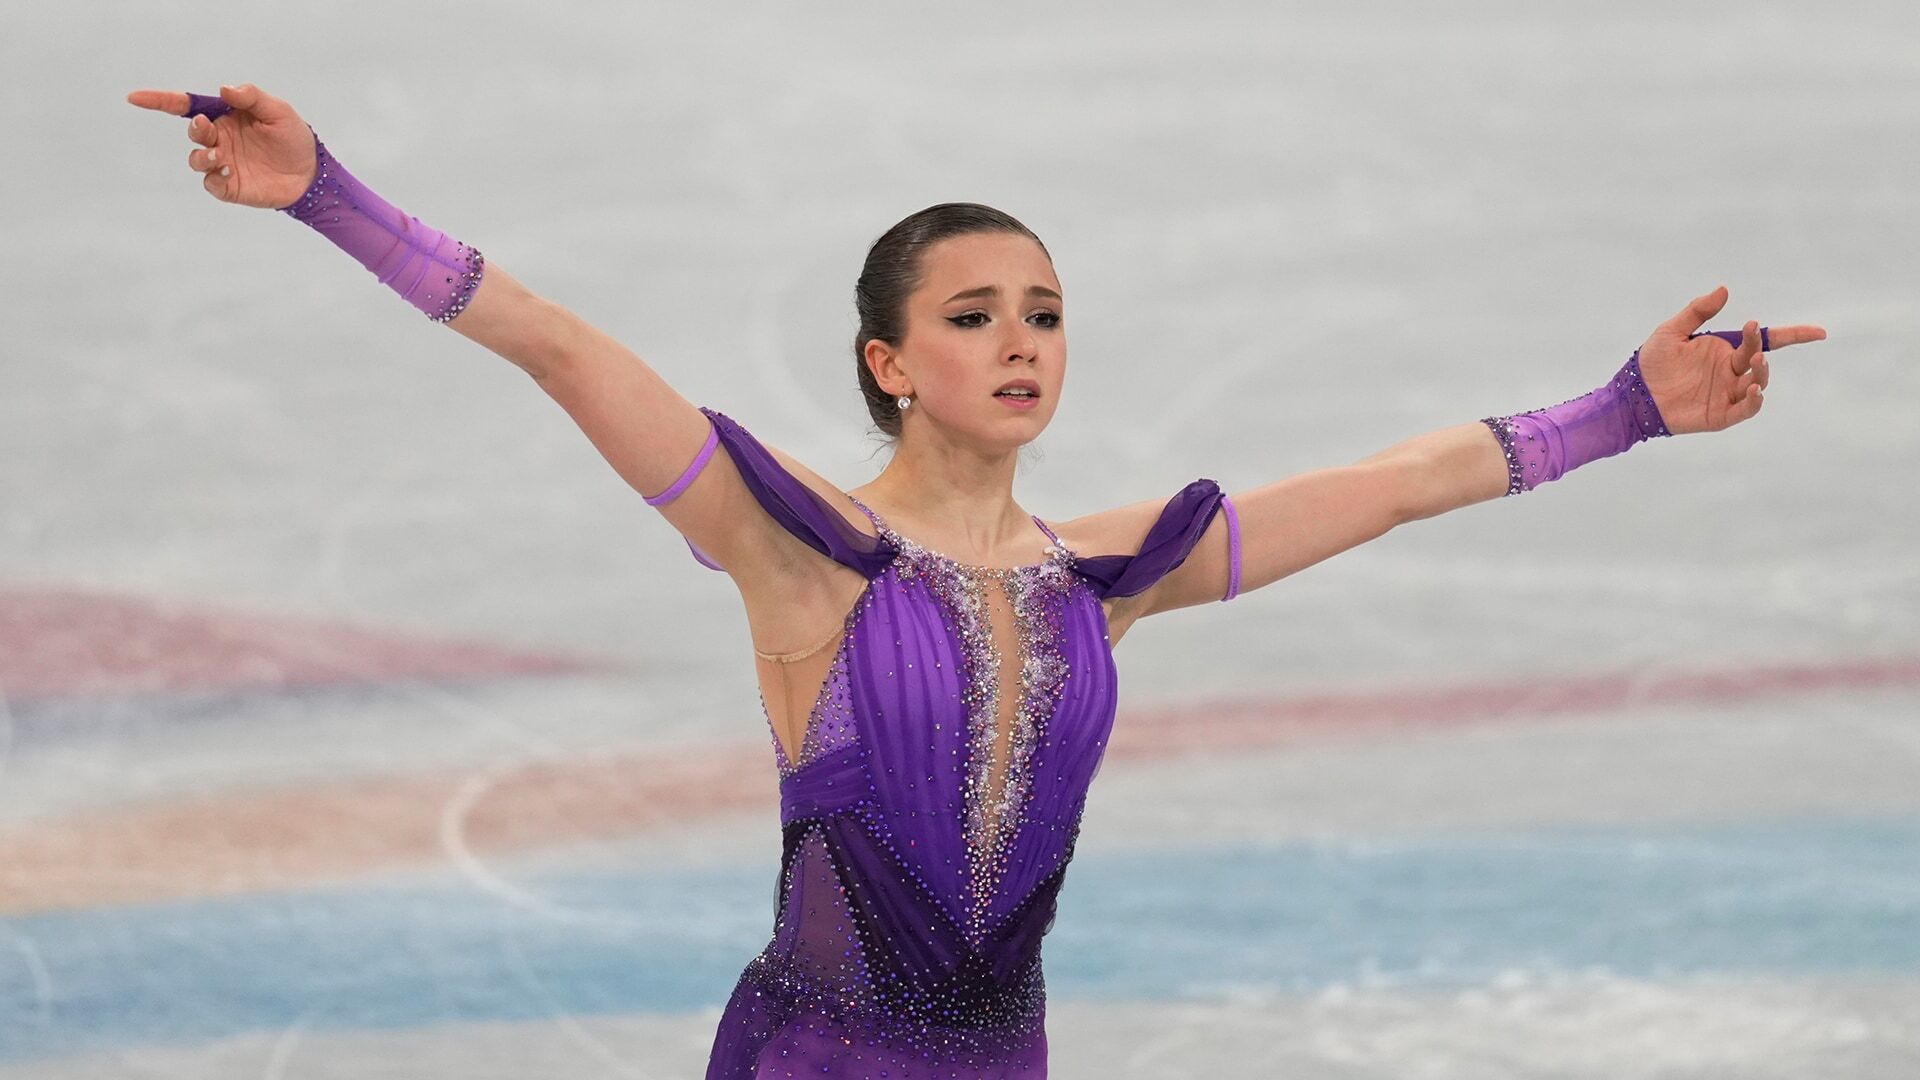 Layden Valieva doping case depriving viewers, and her, of Olympic moment Olympics actionnewsnow